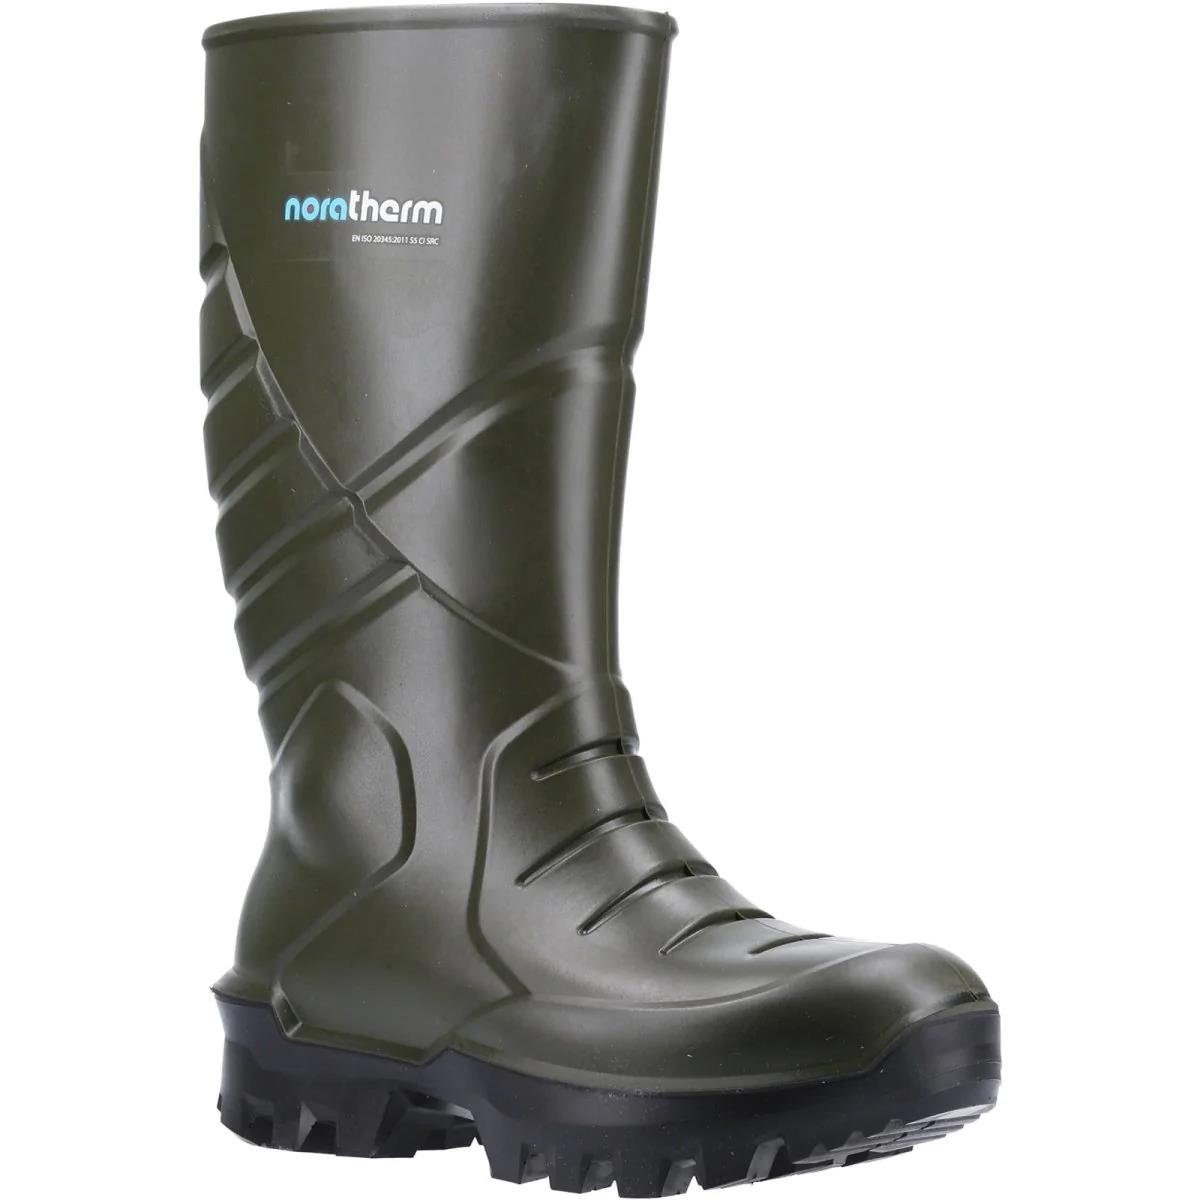 Nora Noramax S5 Green Farming Agricultural Lightweight Safety Wellies Boots